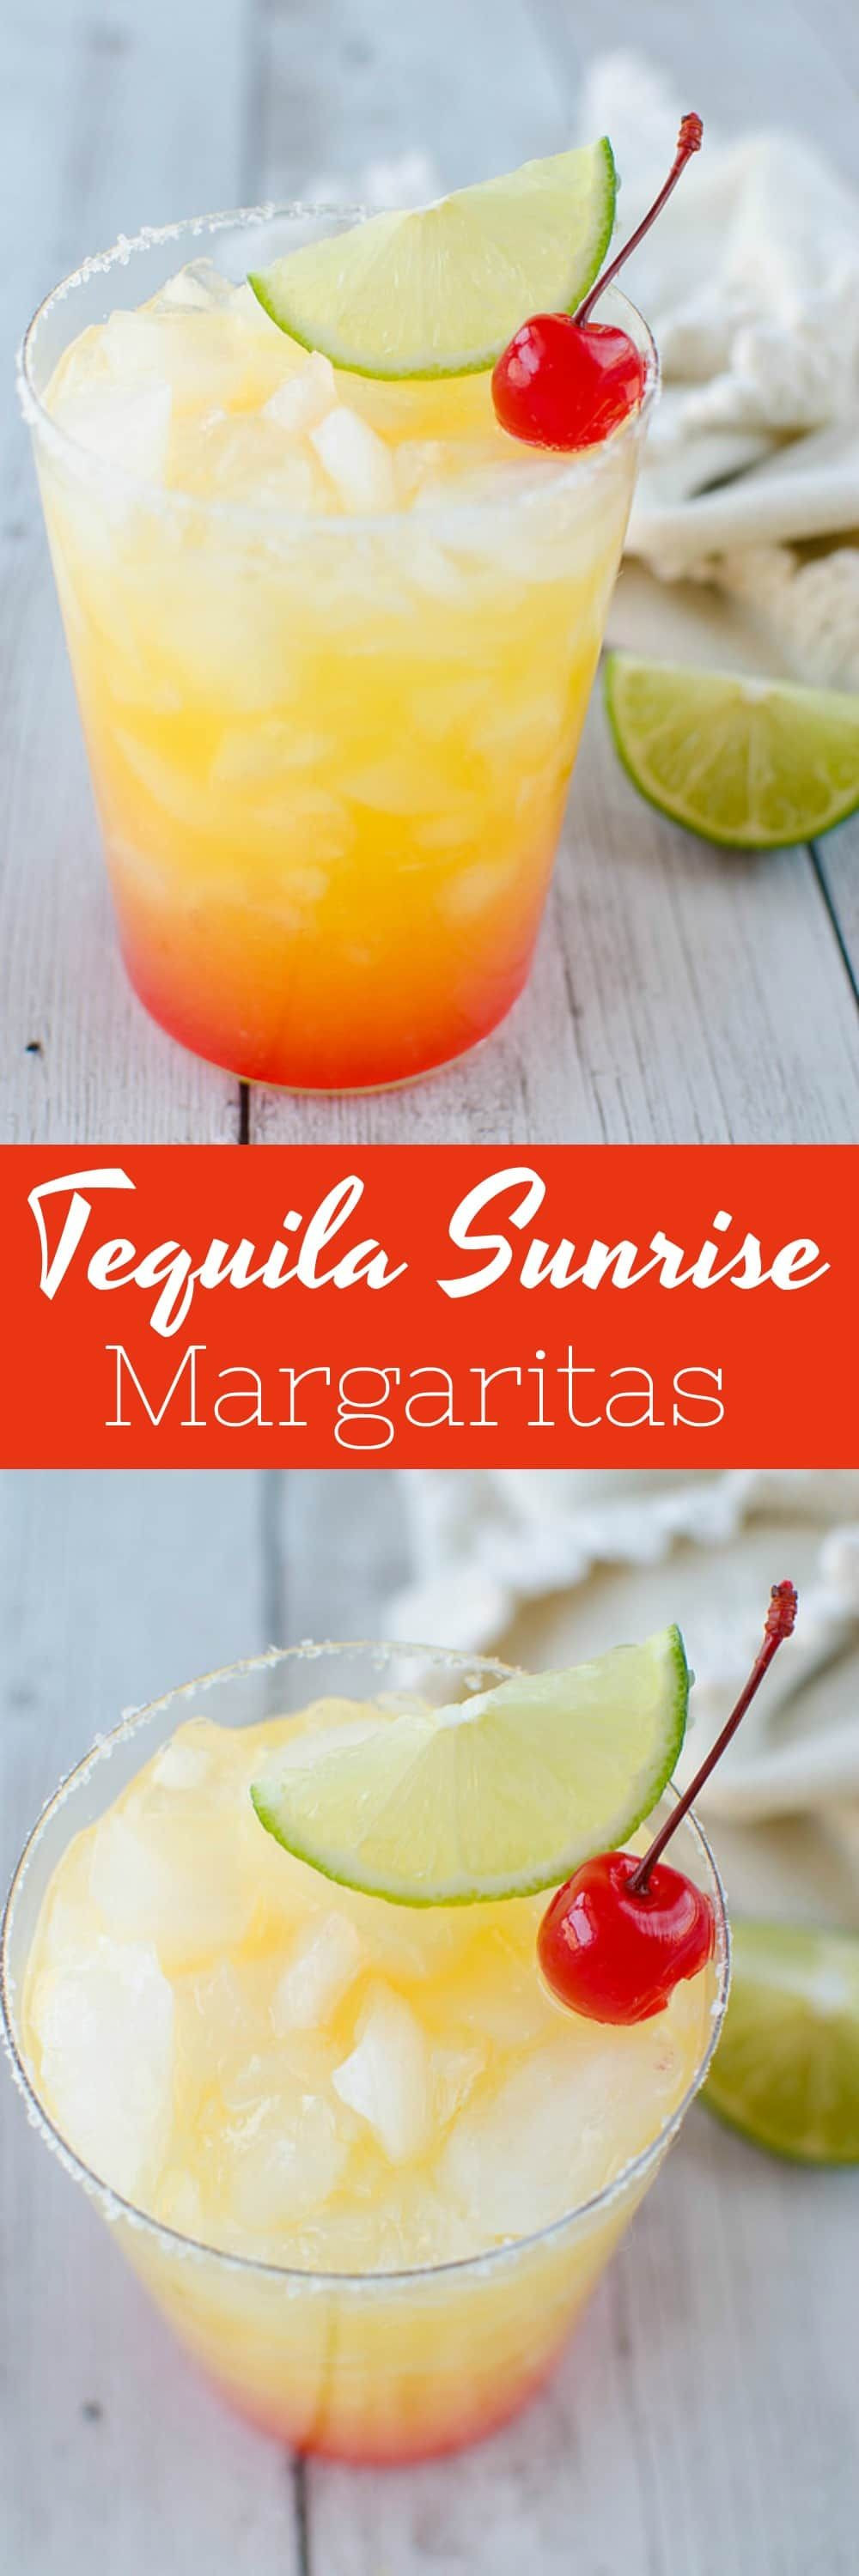 Low Calorie Tequila Drinks
 Skinny Tequila Sunrise Margaritas a low calorie